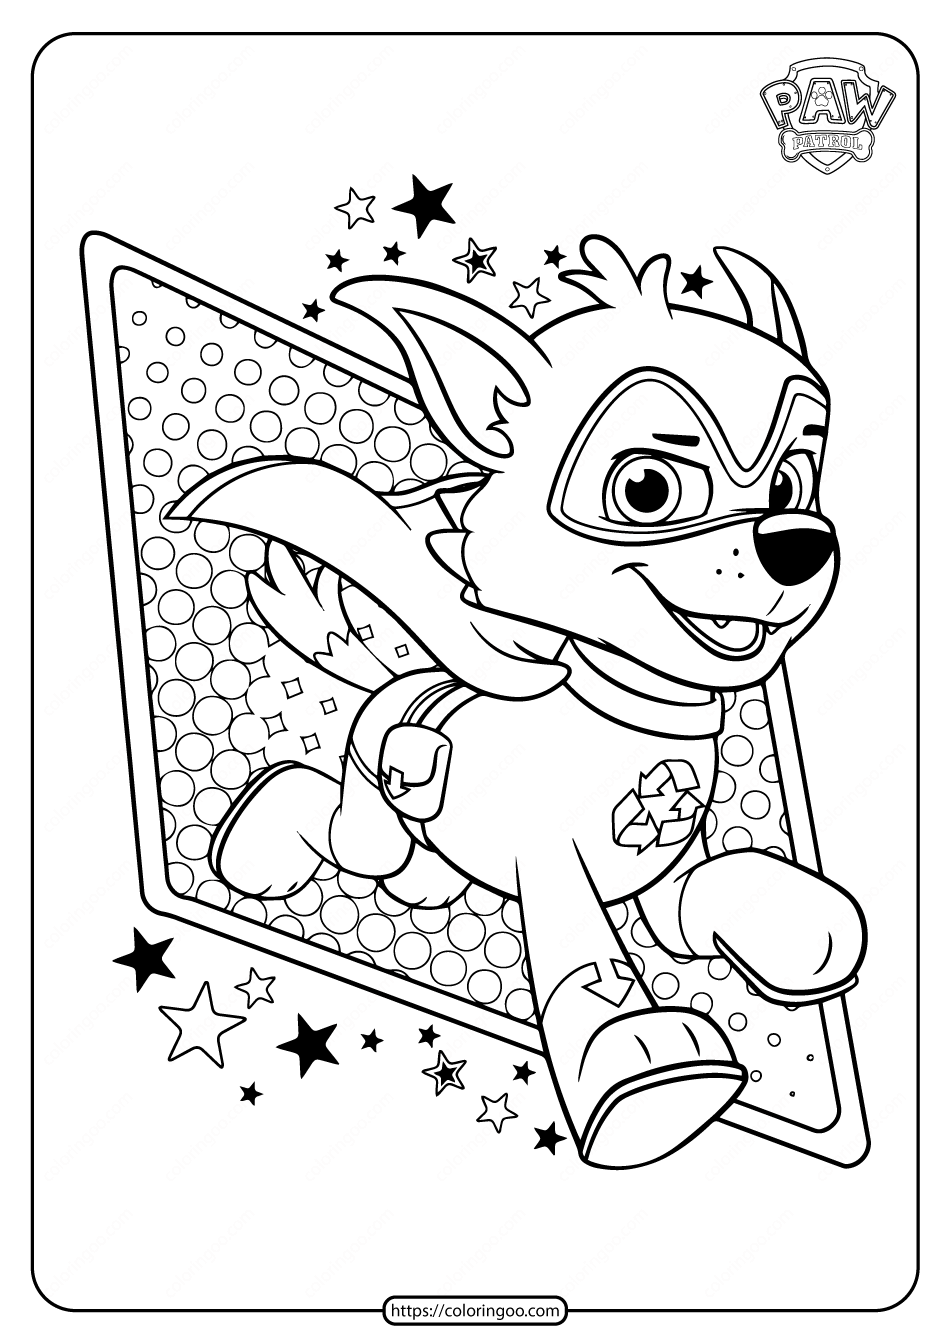 paw patrol rocky coloring pages for boys